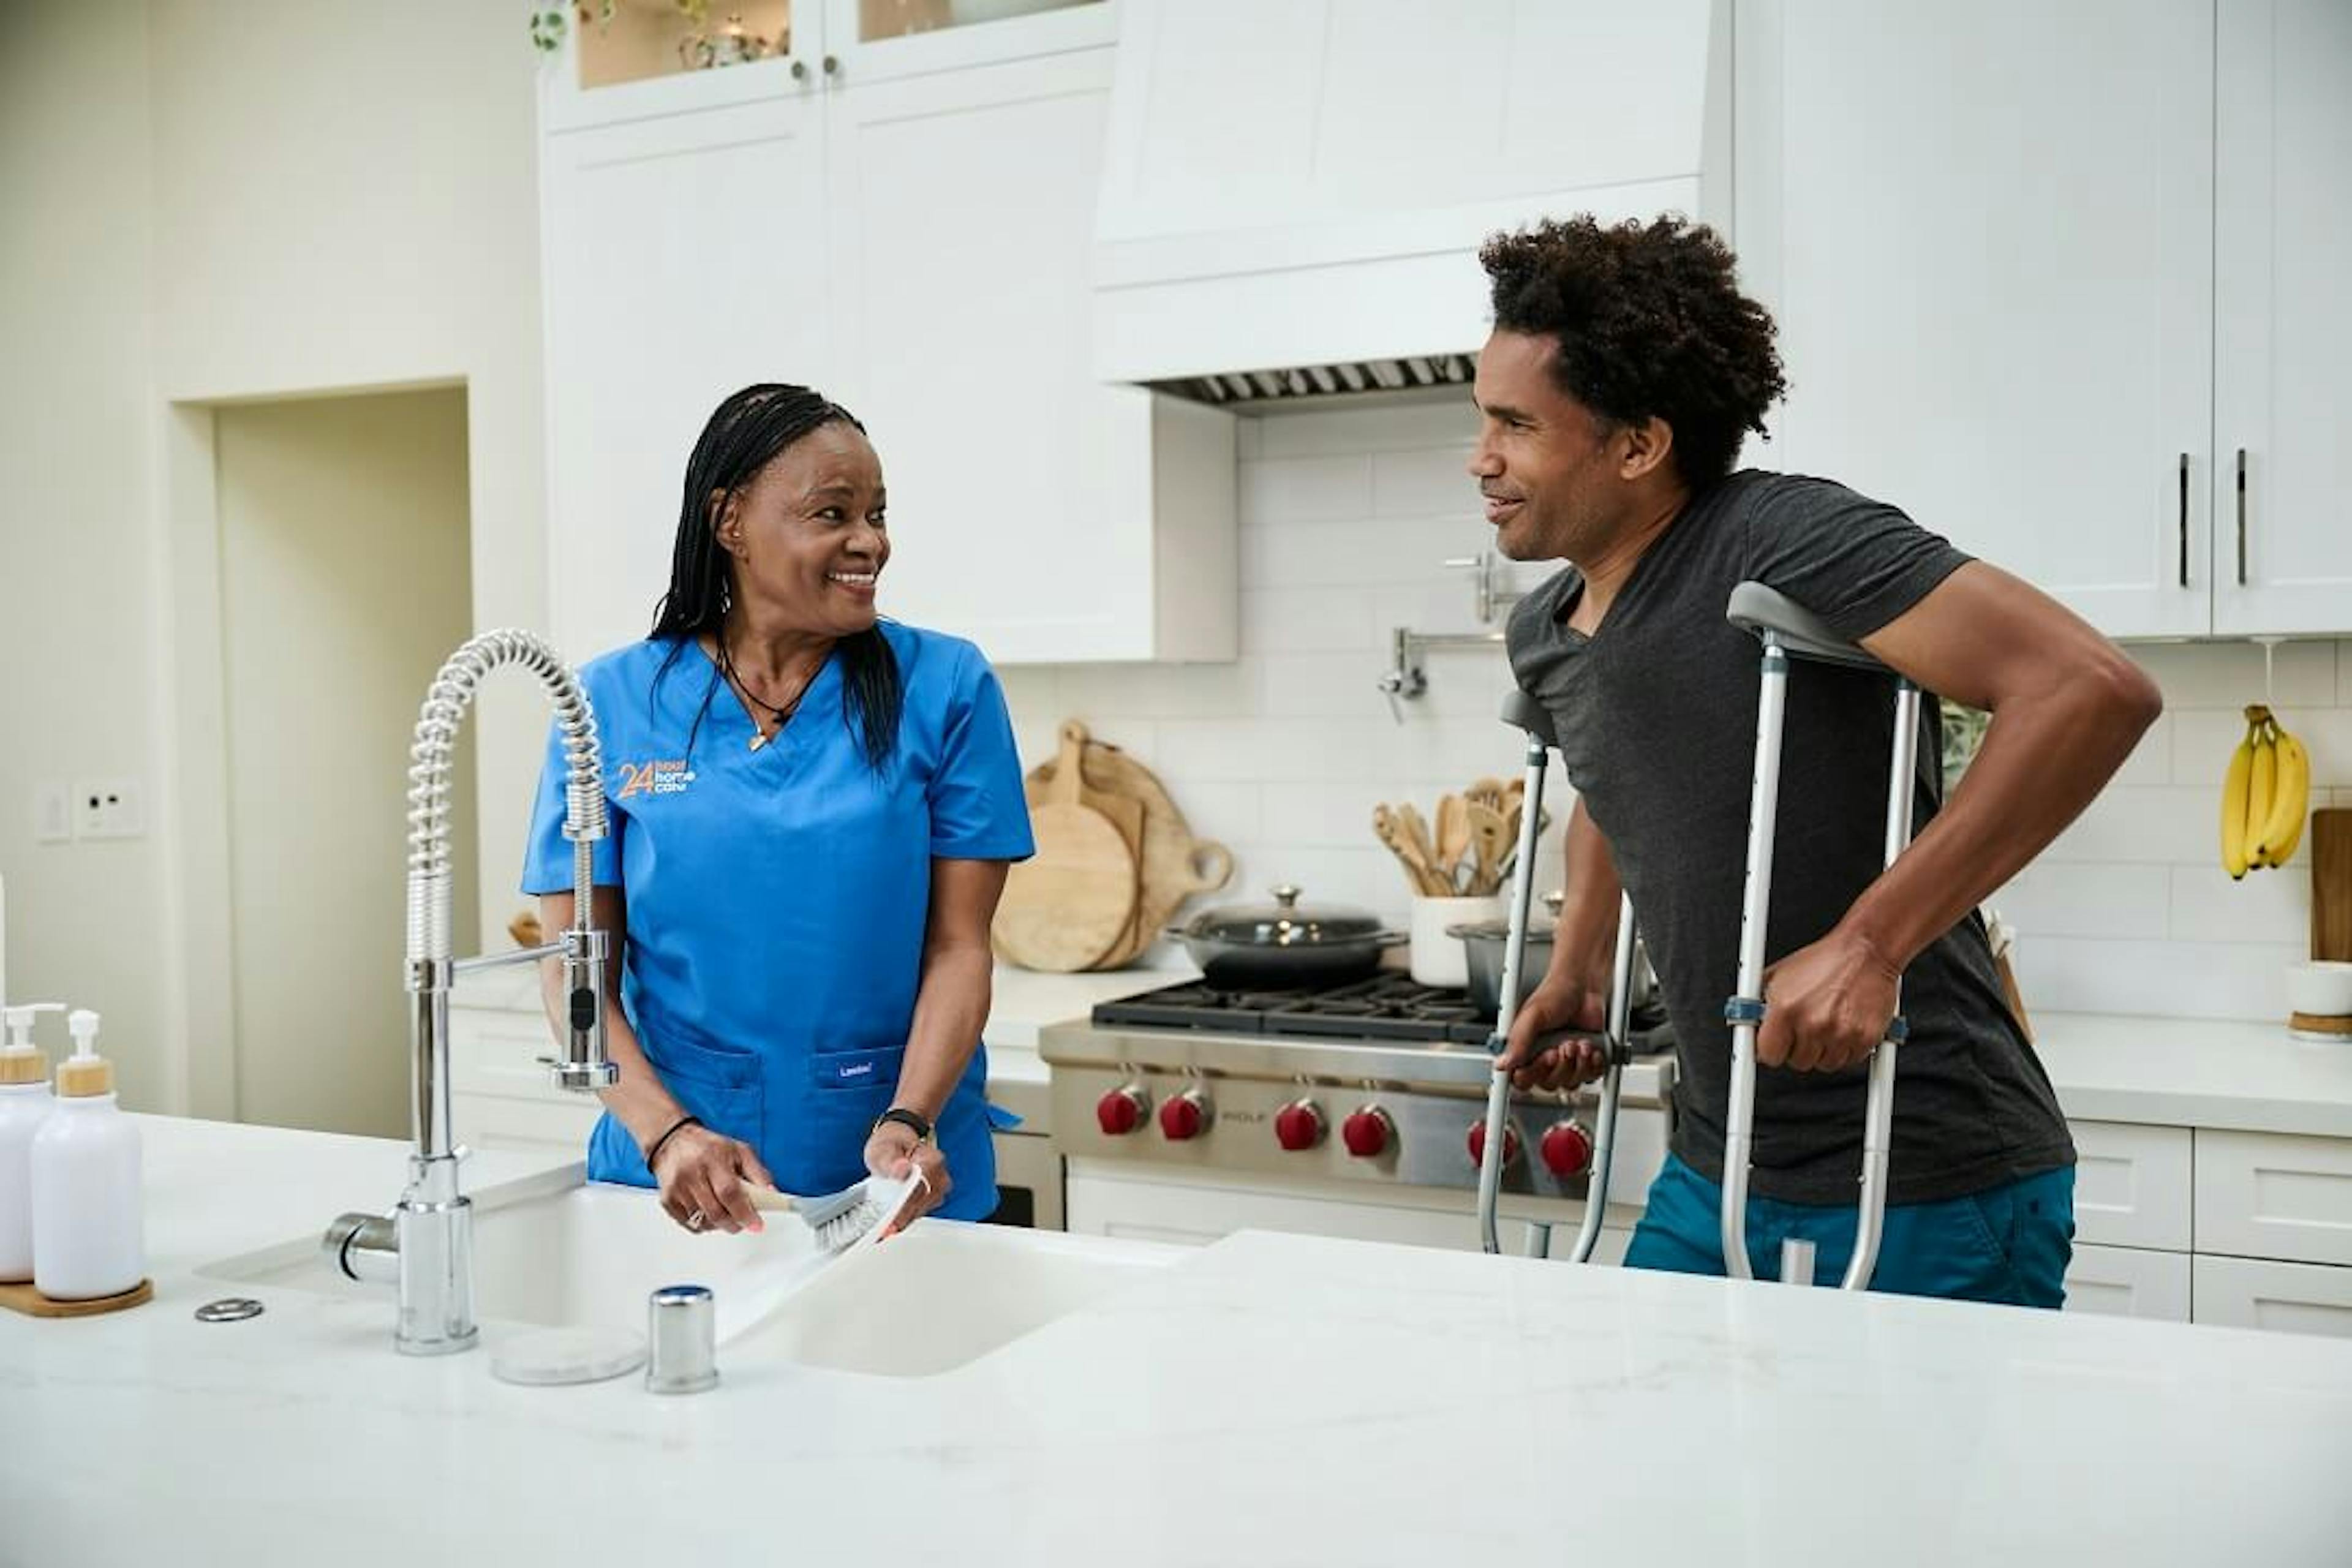 A female caregiver assists an adult client on crutches in the kitchen.